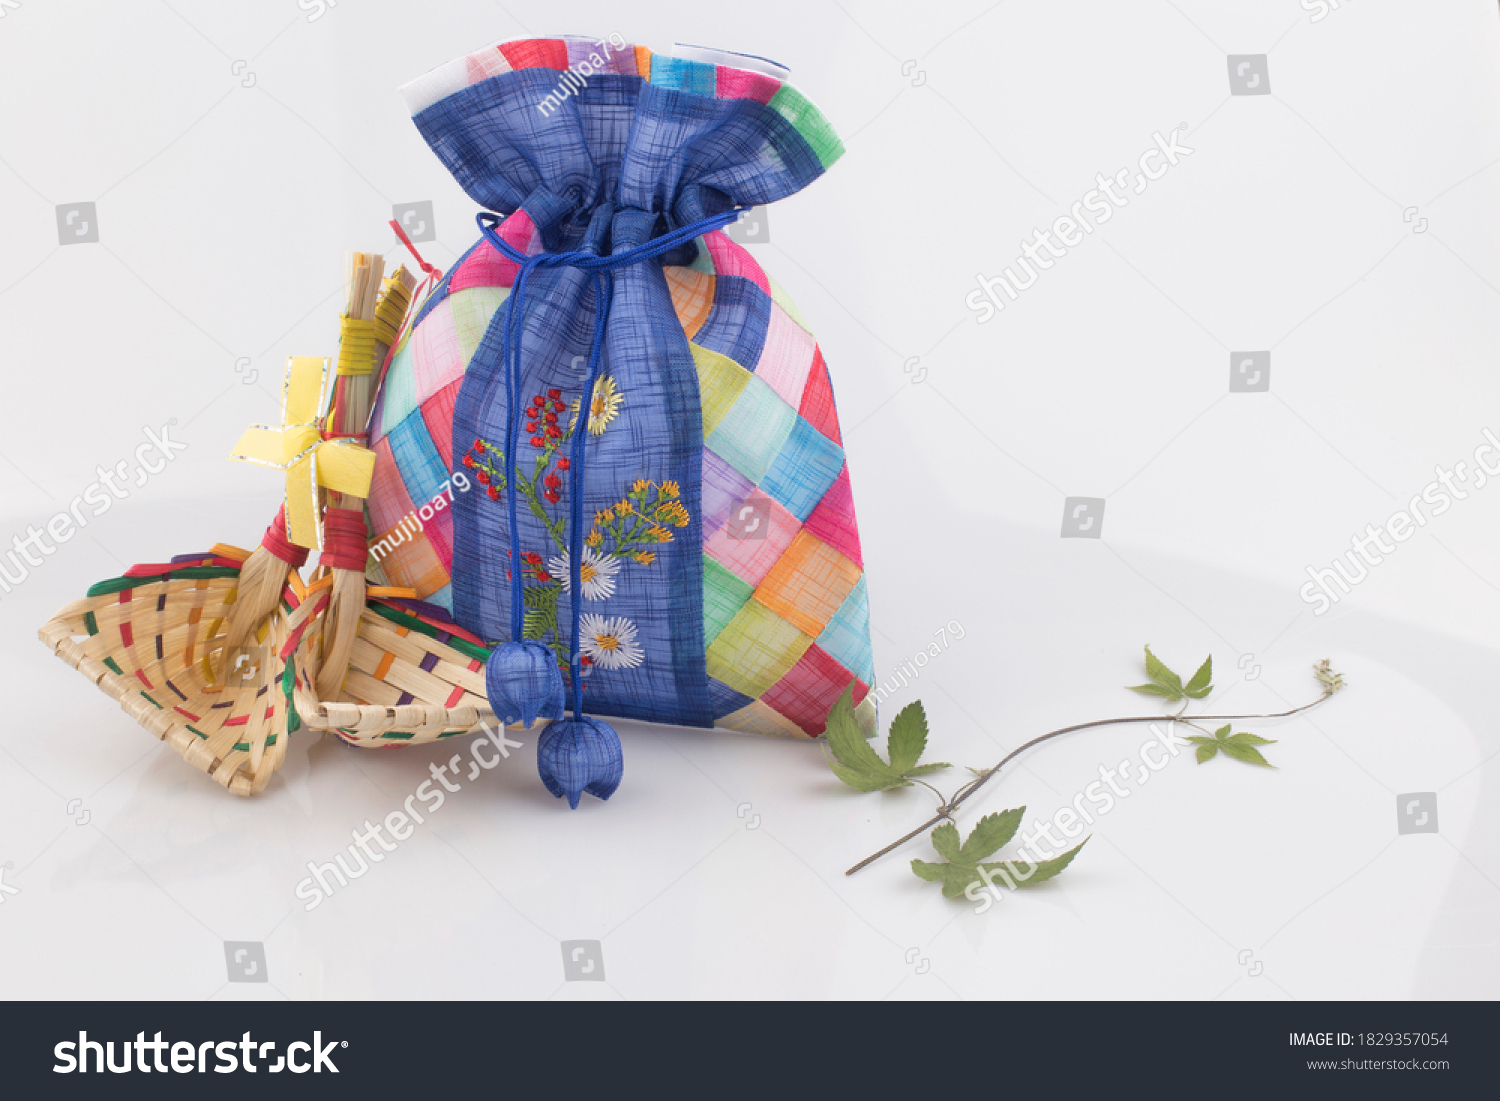 Korean traditional packaging and lucky bag on white backround. #1829357054